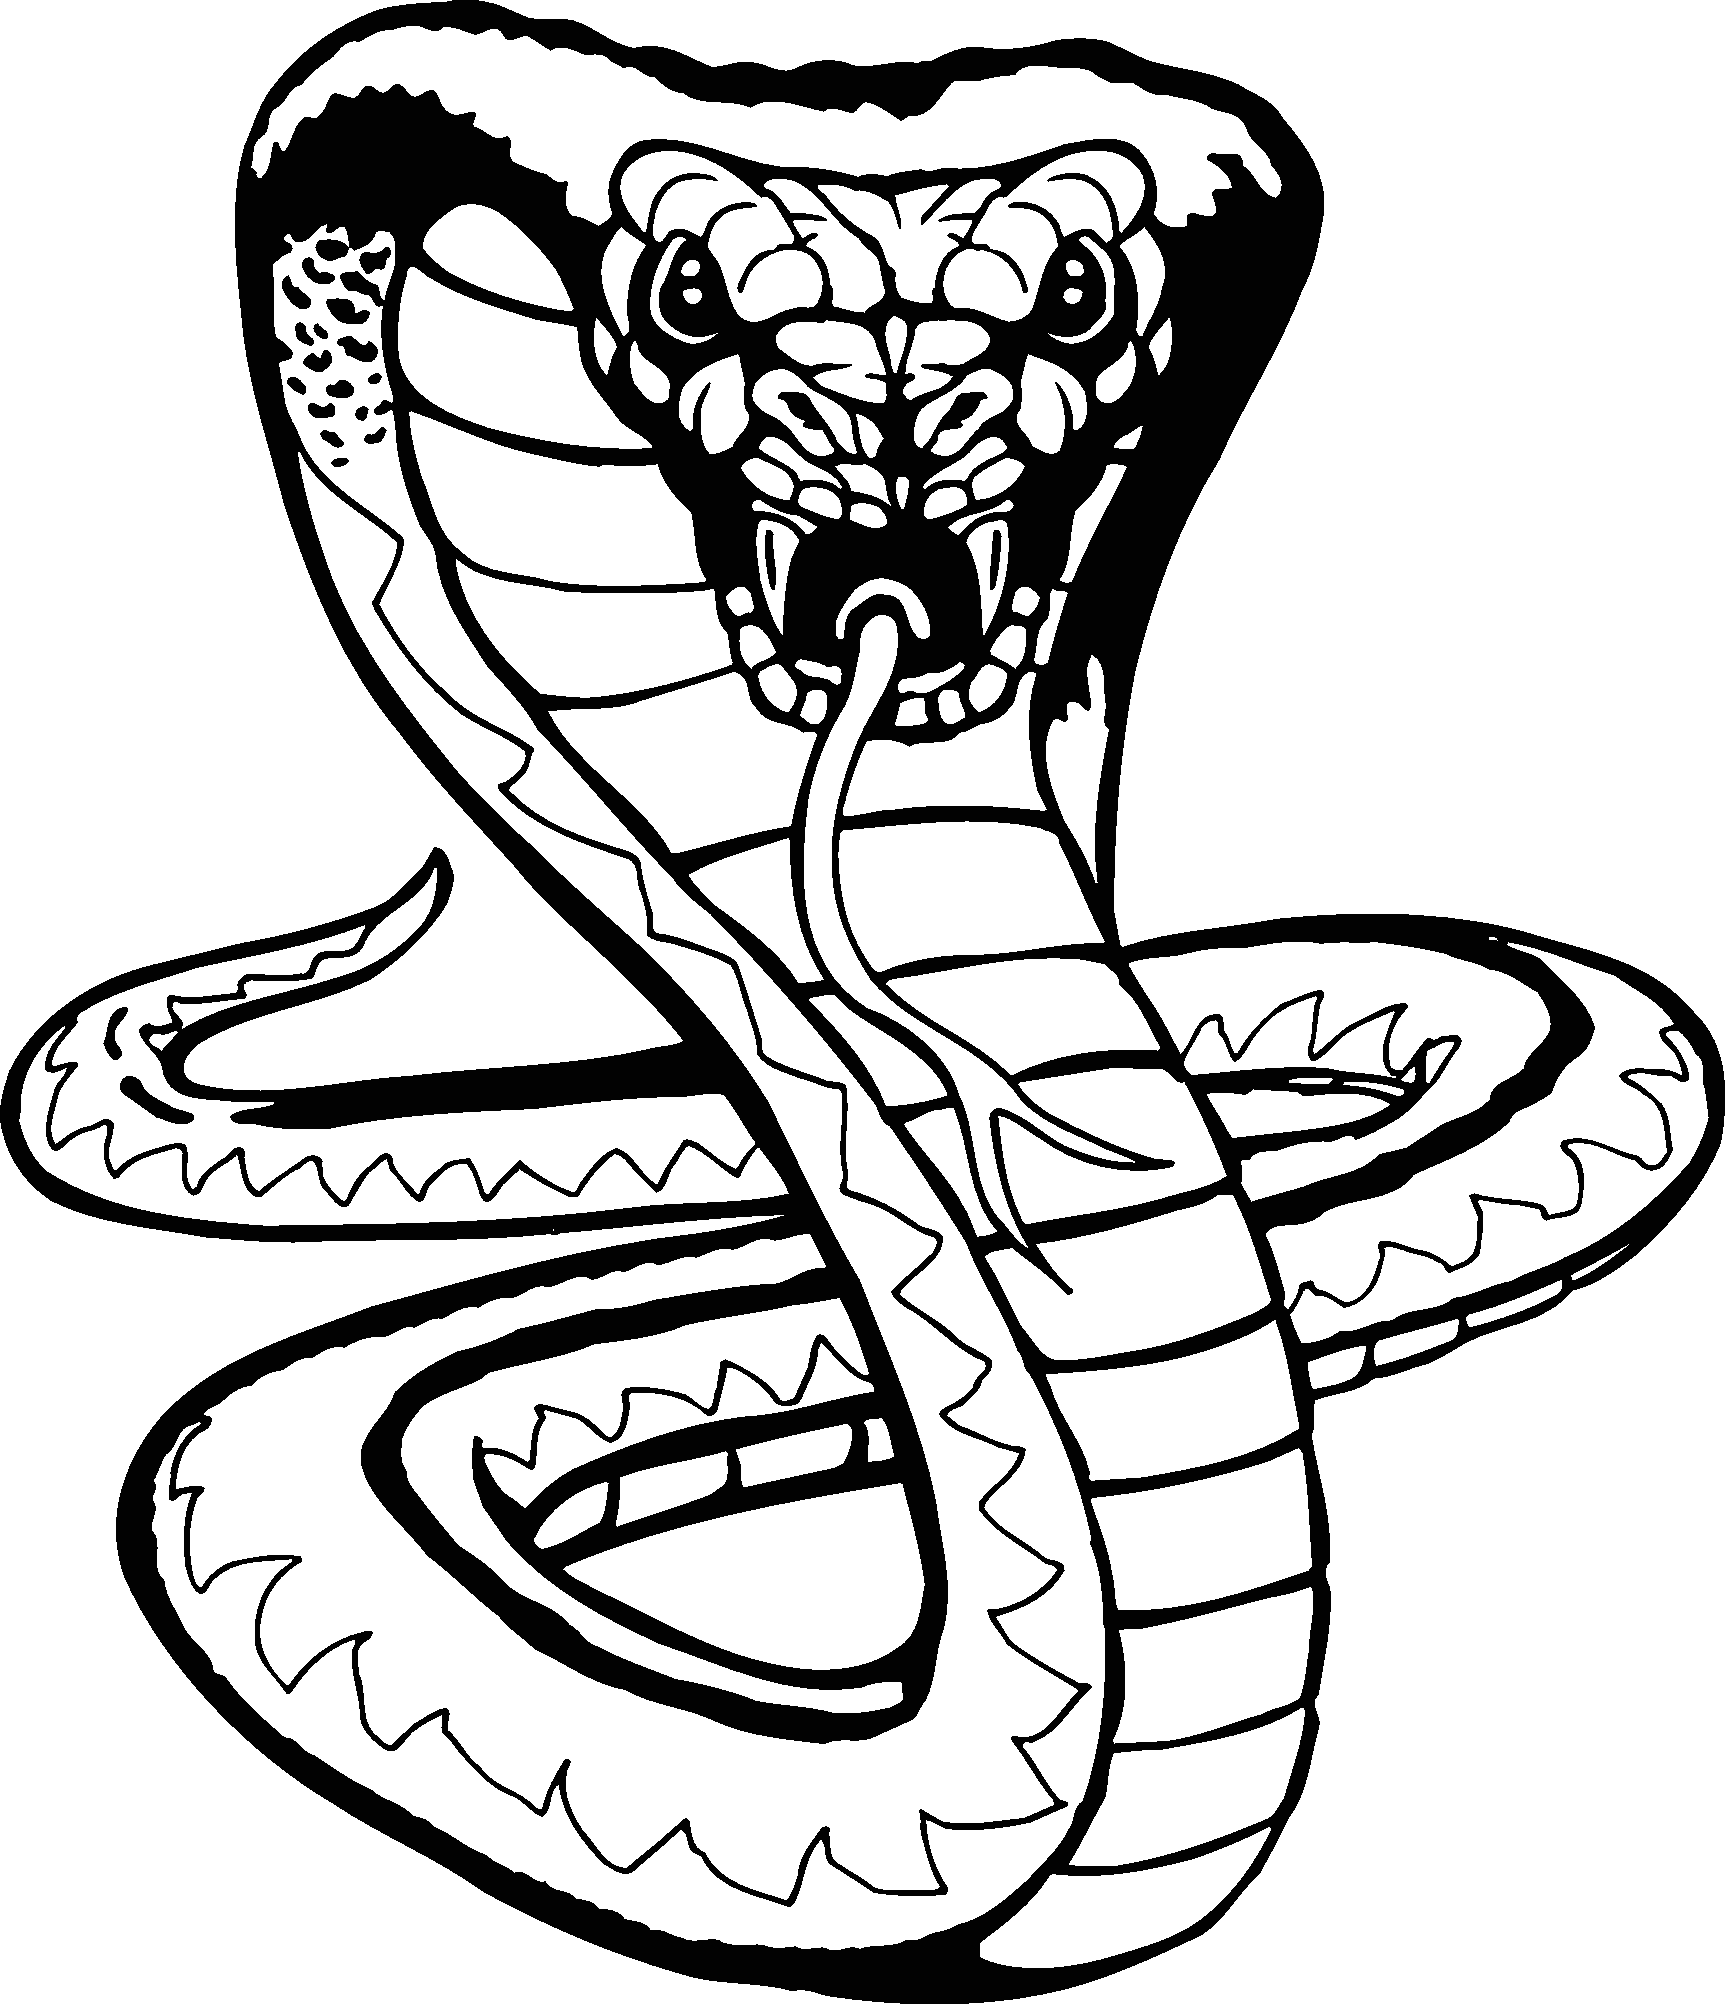 How To Draw A Viper Snake - ClipArt Best